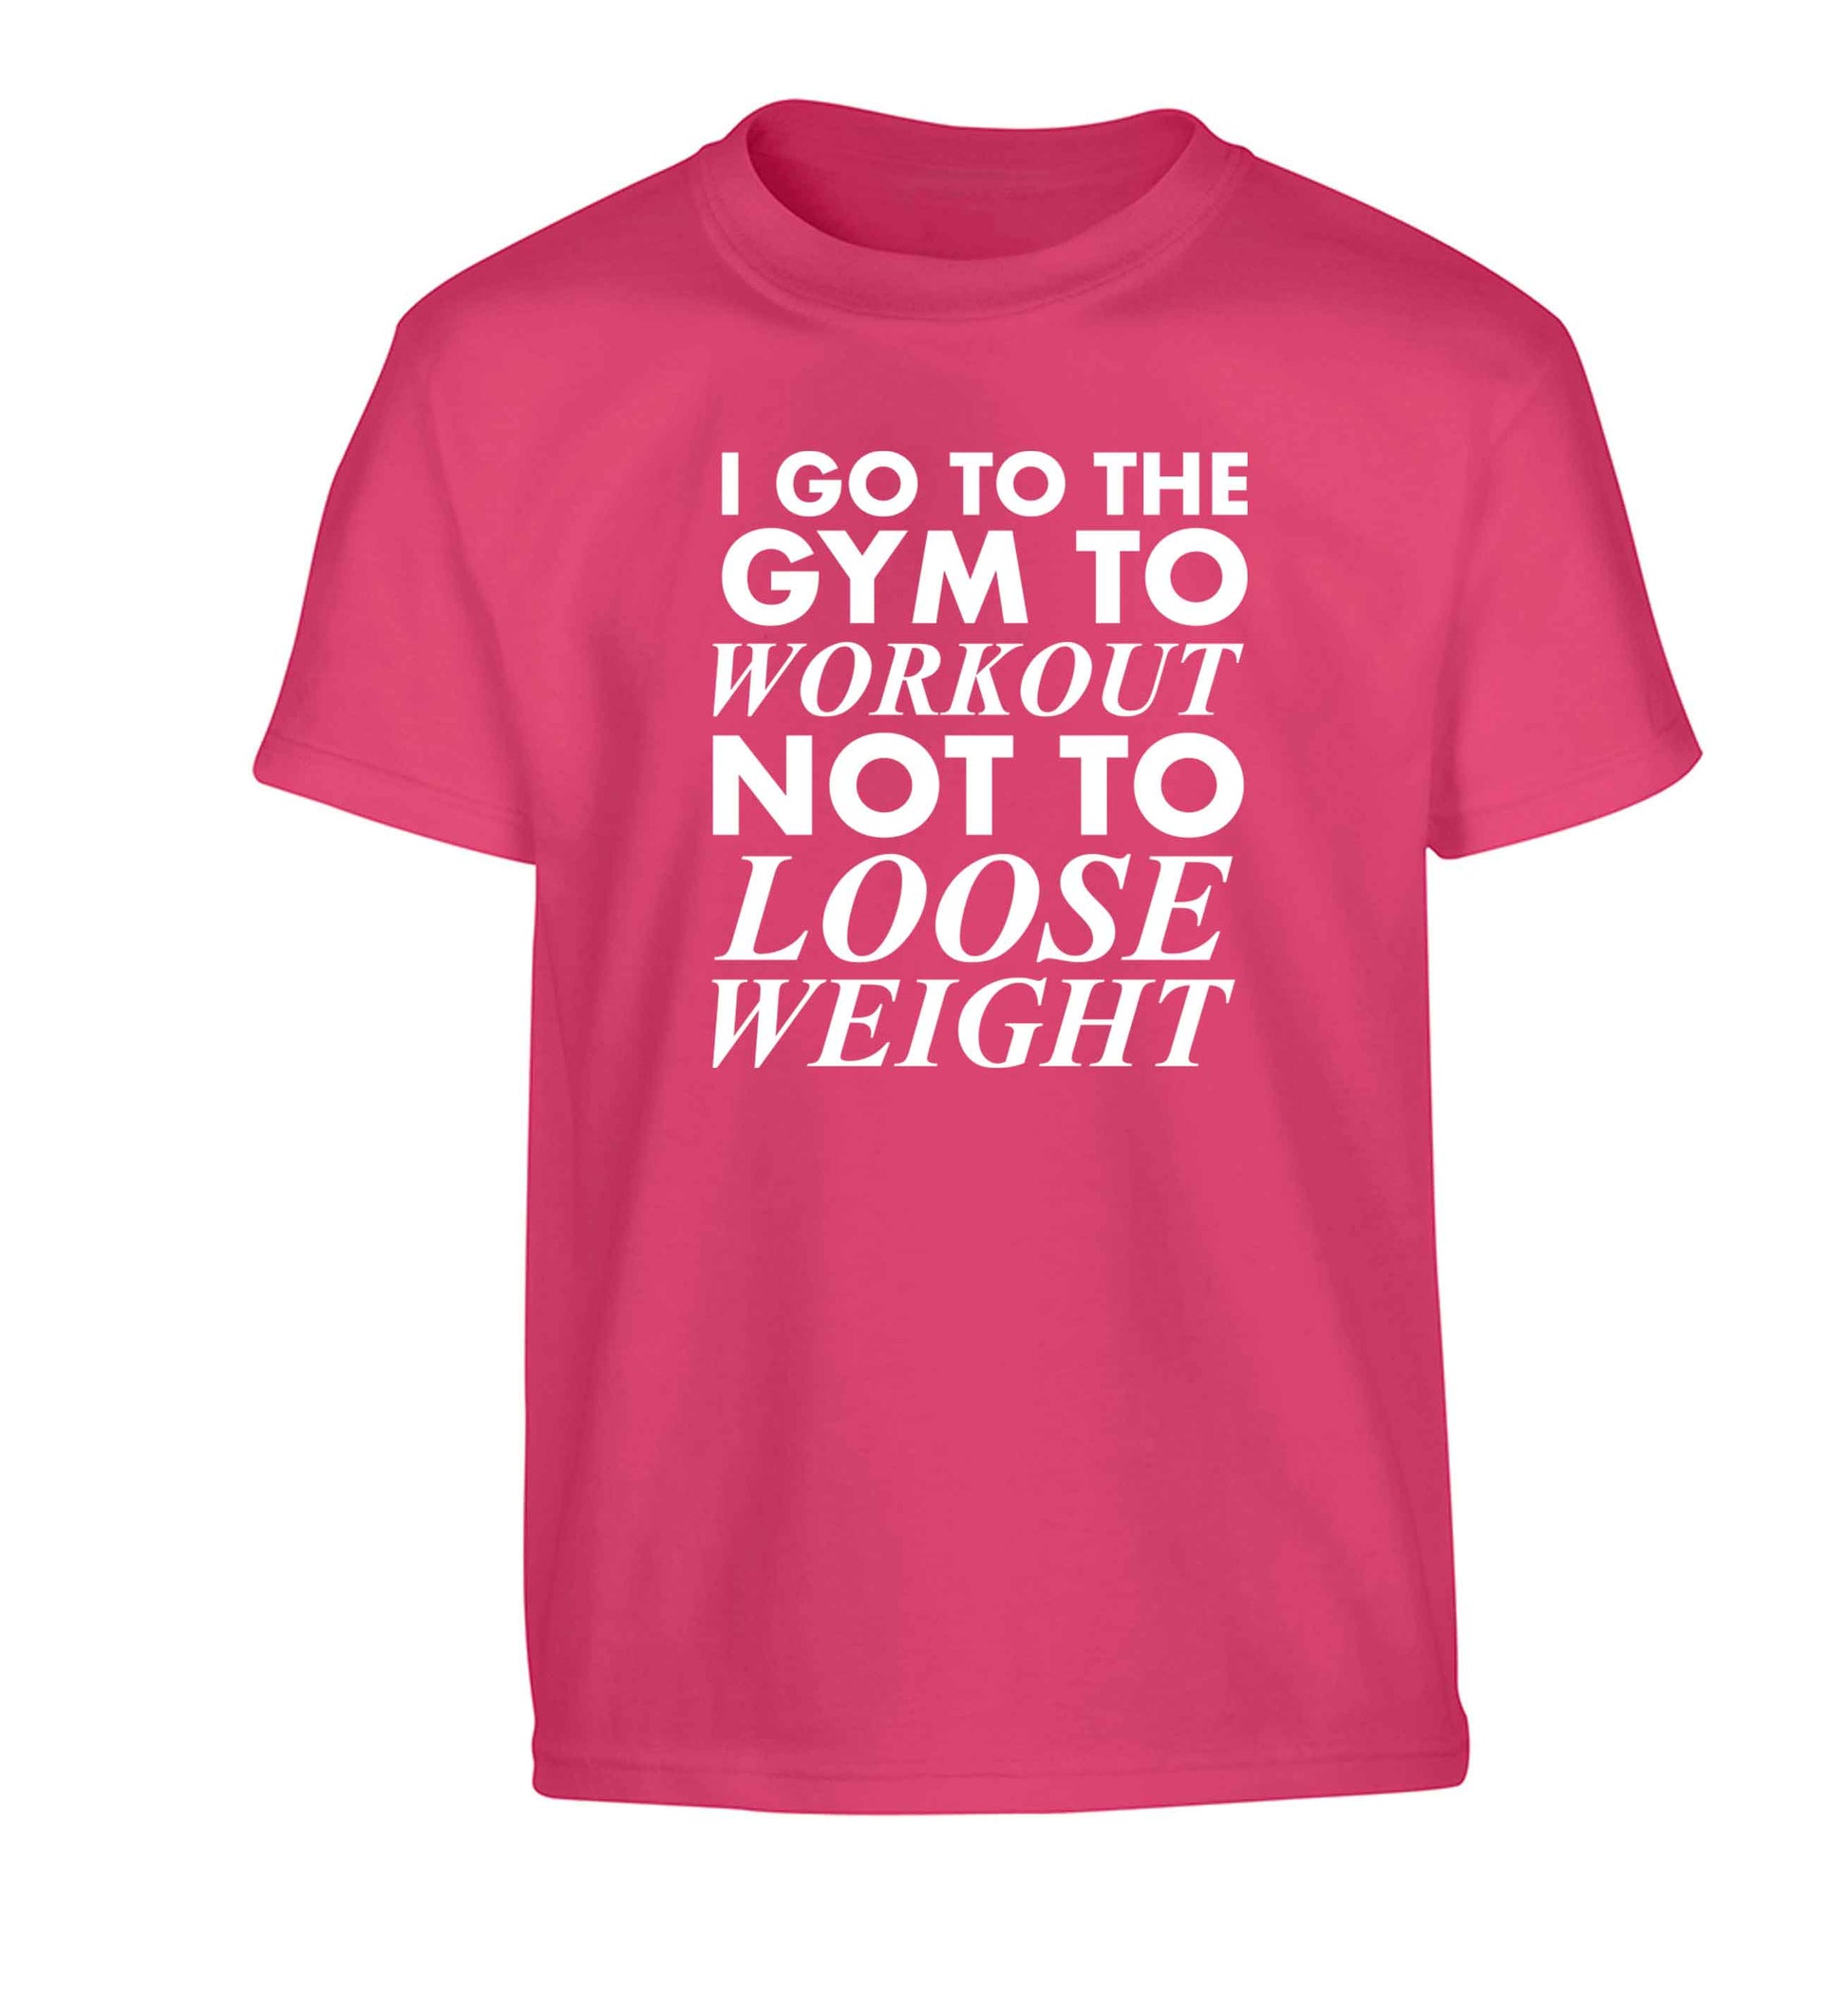 I go to the gym to workout not to loose weight Children's pink Tshirt 12-13 Years